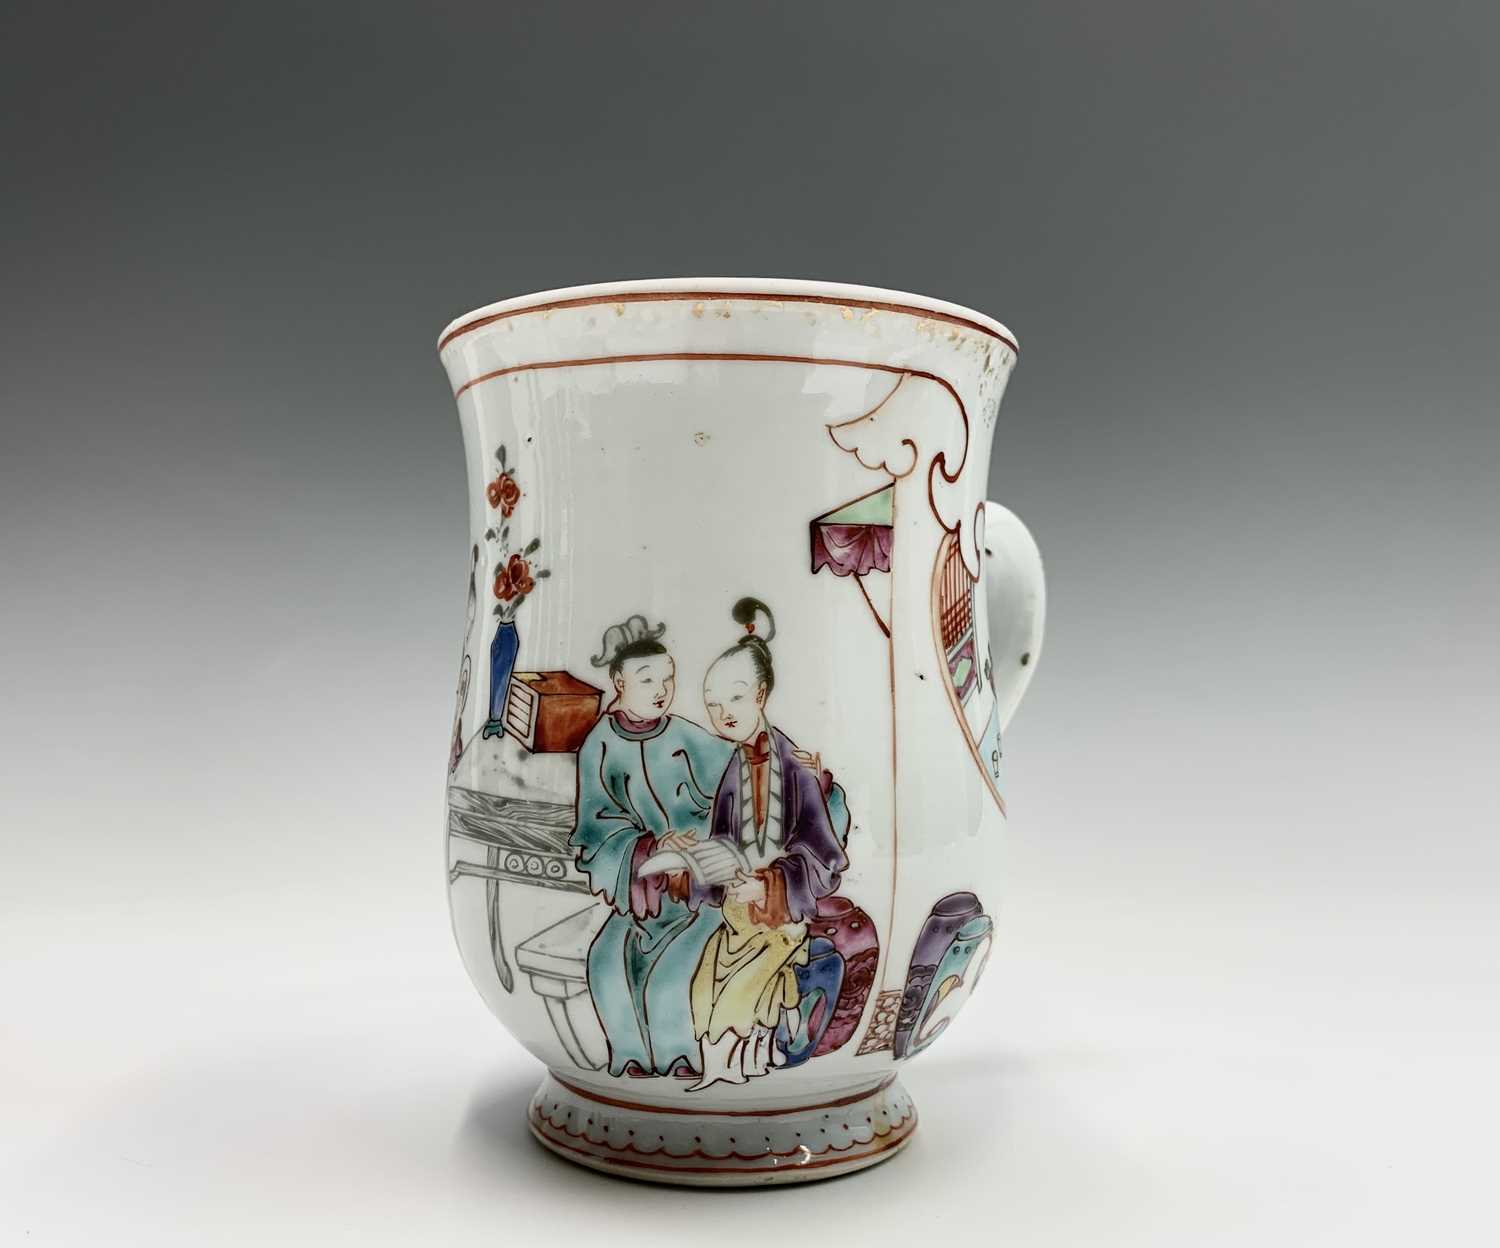 A Chinese famille rose export porcelain mug, 18th century, depicting an interior scene with a - Image 5 of 11